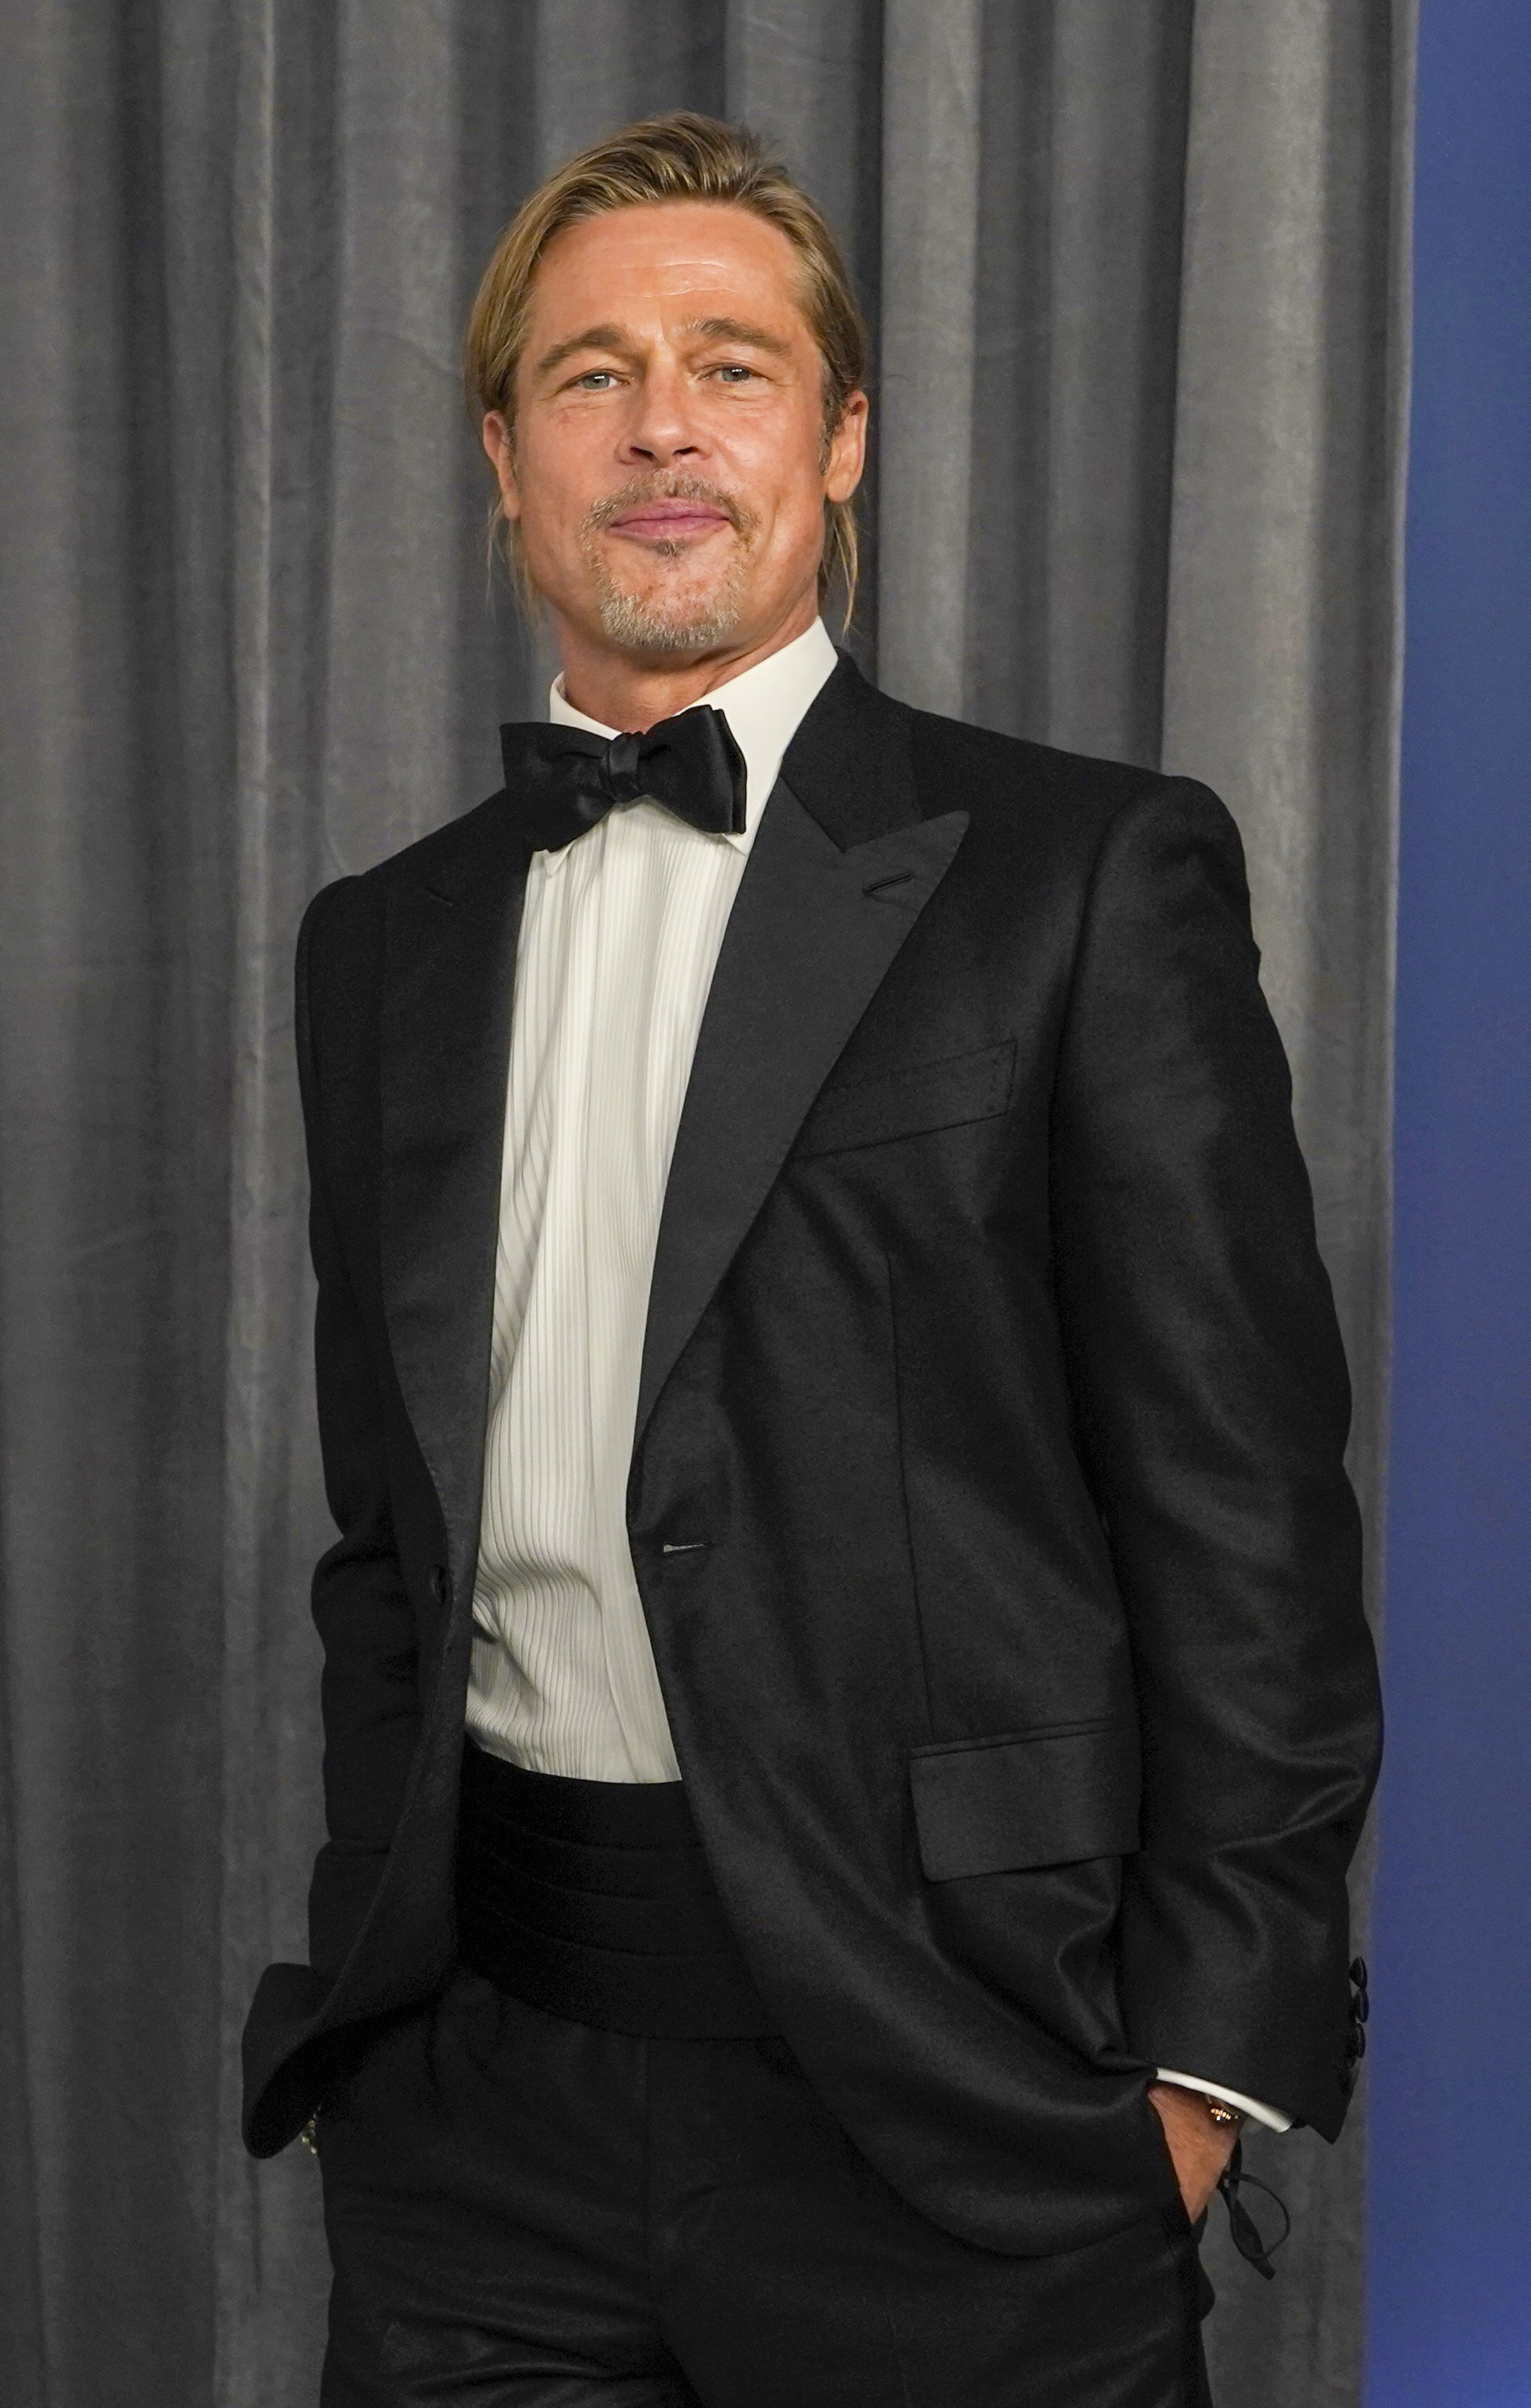 Brad Pitt poses in the press room at the Oscars on Sunday, April 25, 2021, at Union Station in Los Angeles. | Source: Getty Images